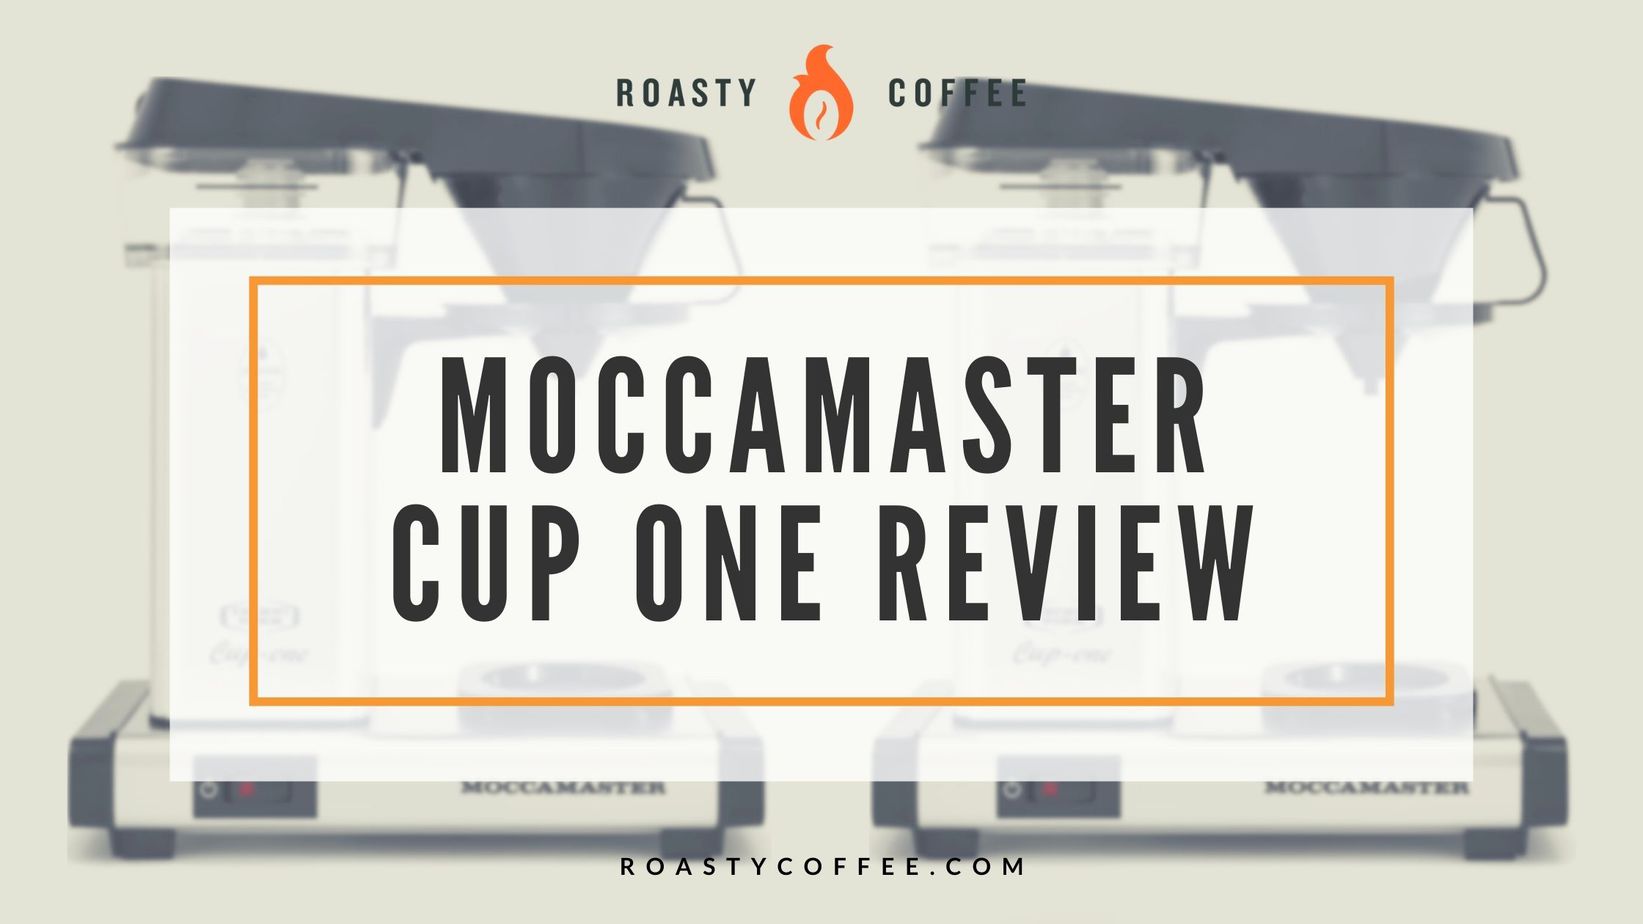  Technivorm Moccamaster 69211 Cup One, One-Cup Coffee